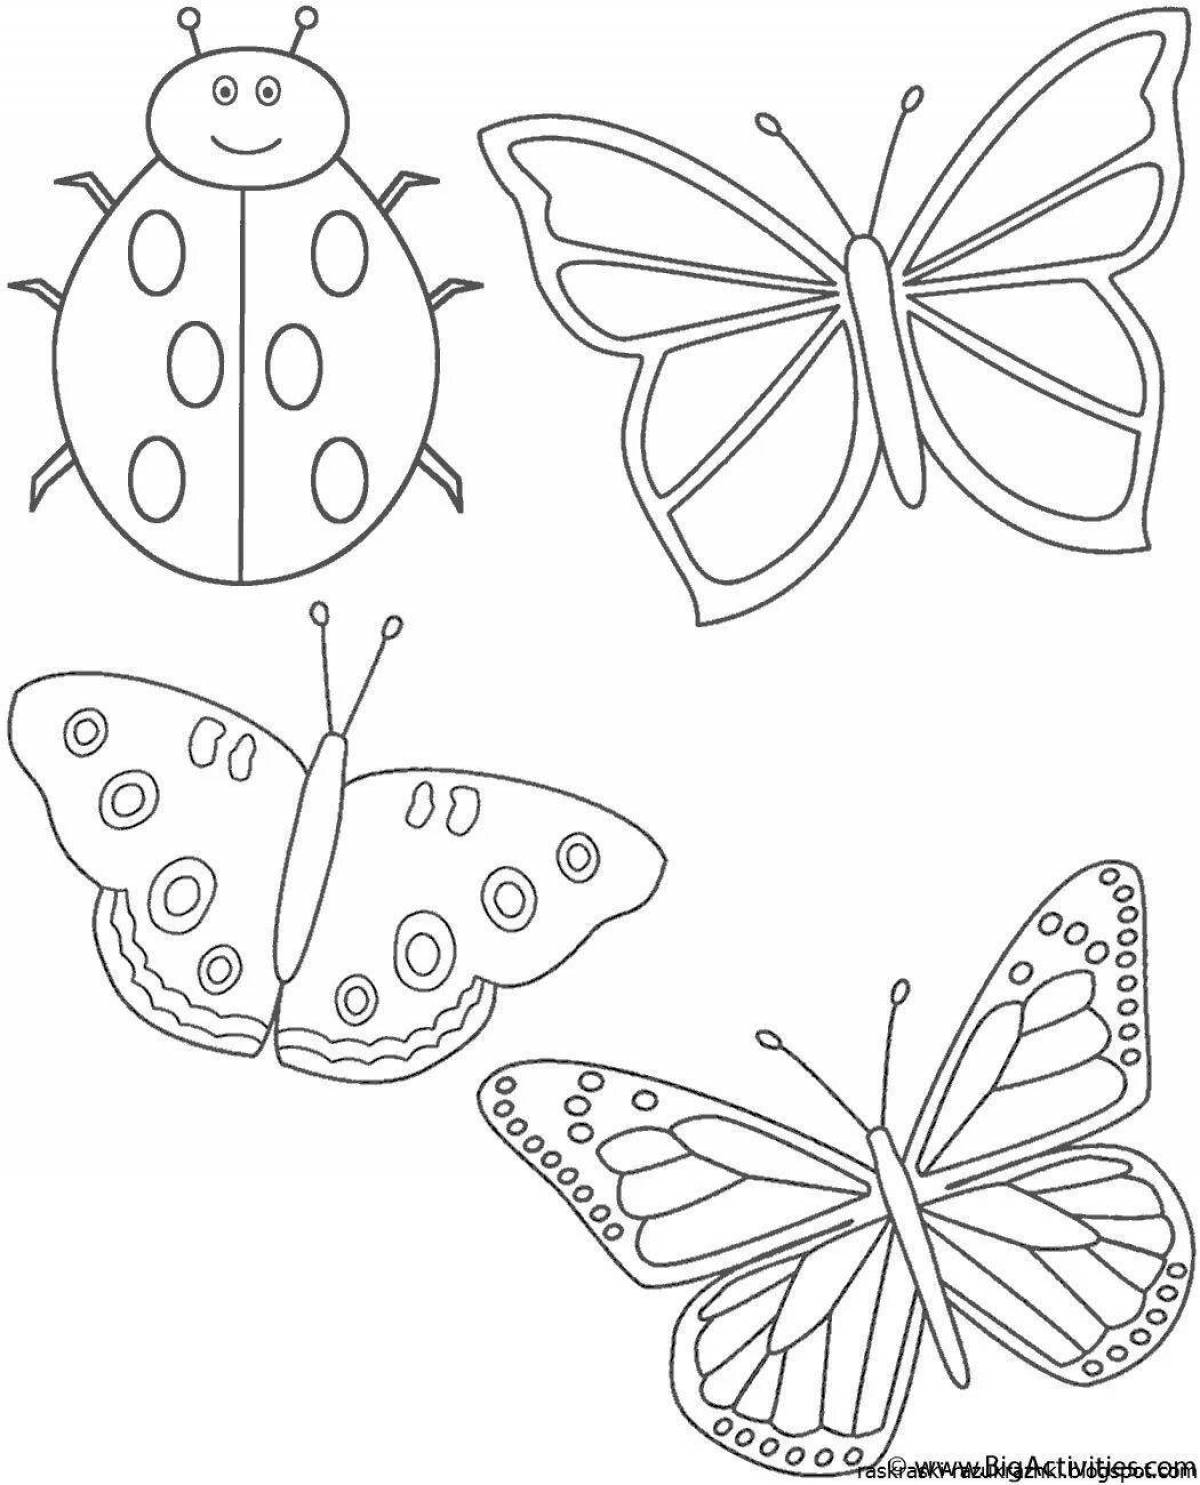 Amazing Butterfly Coloring Page for 4-5 year olds